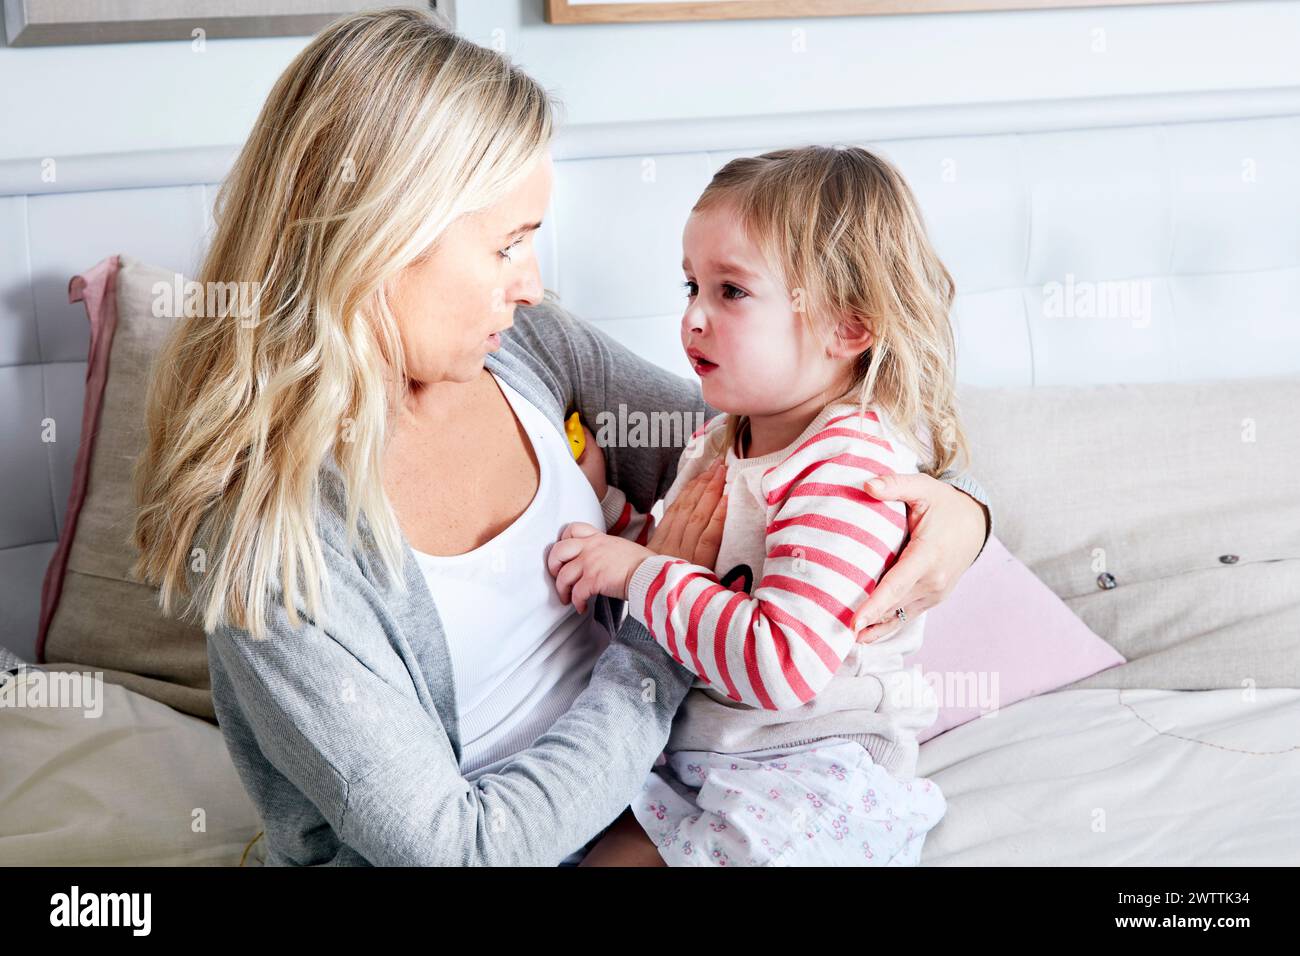 Grandmother comforting crying child on a couch Stock Photo